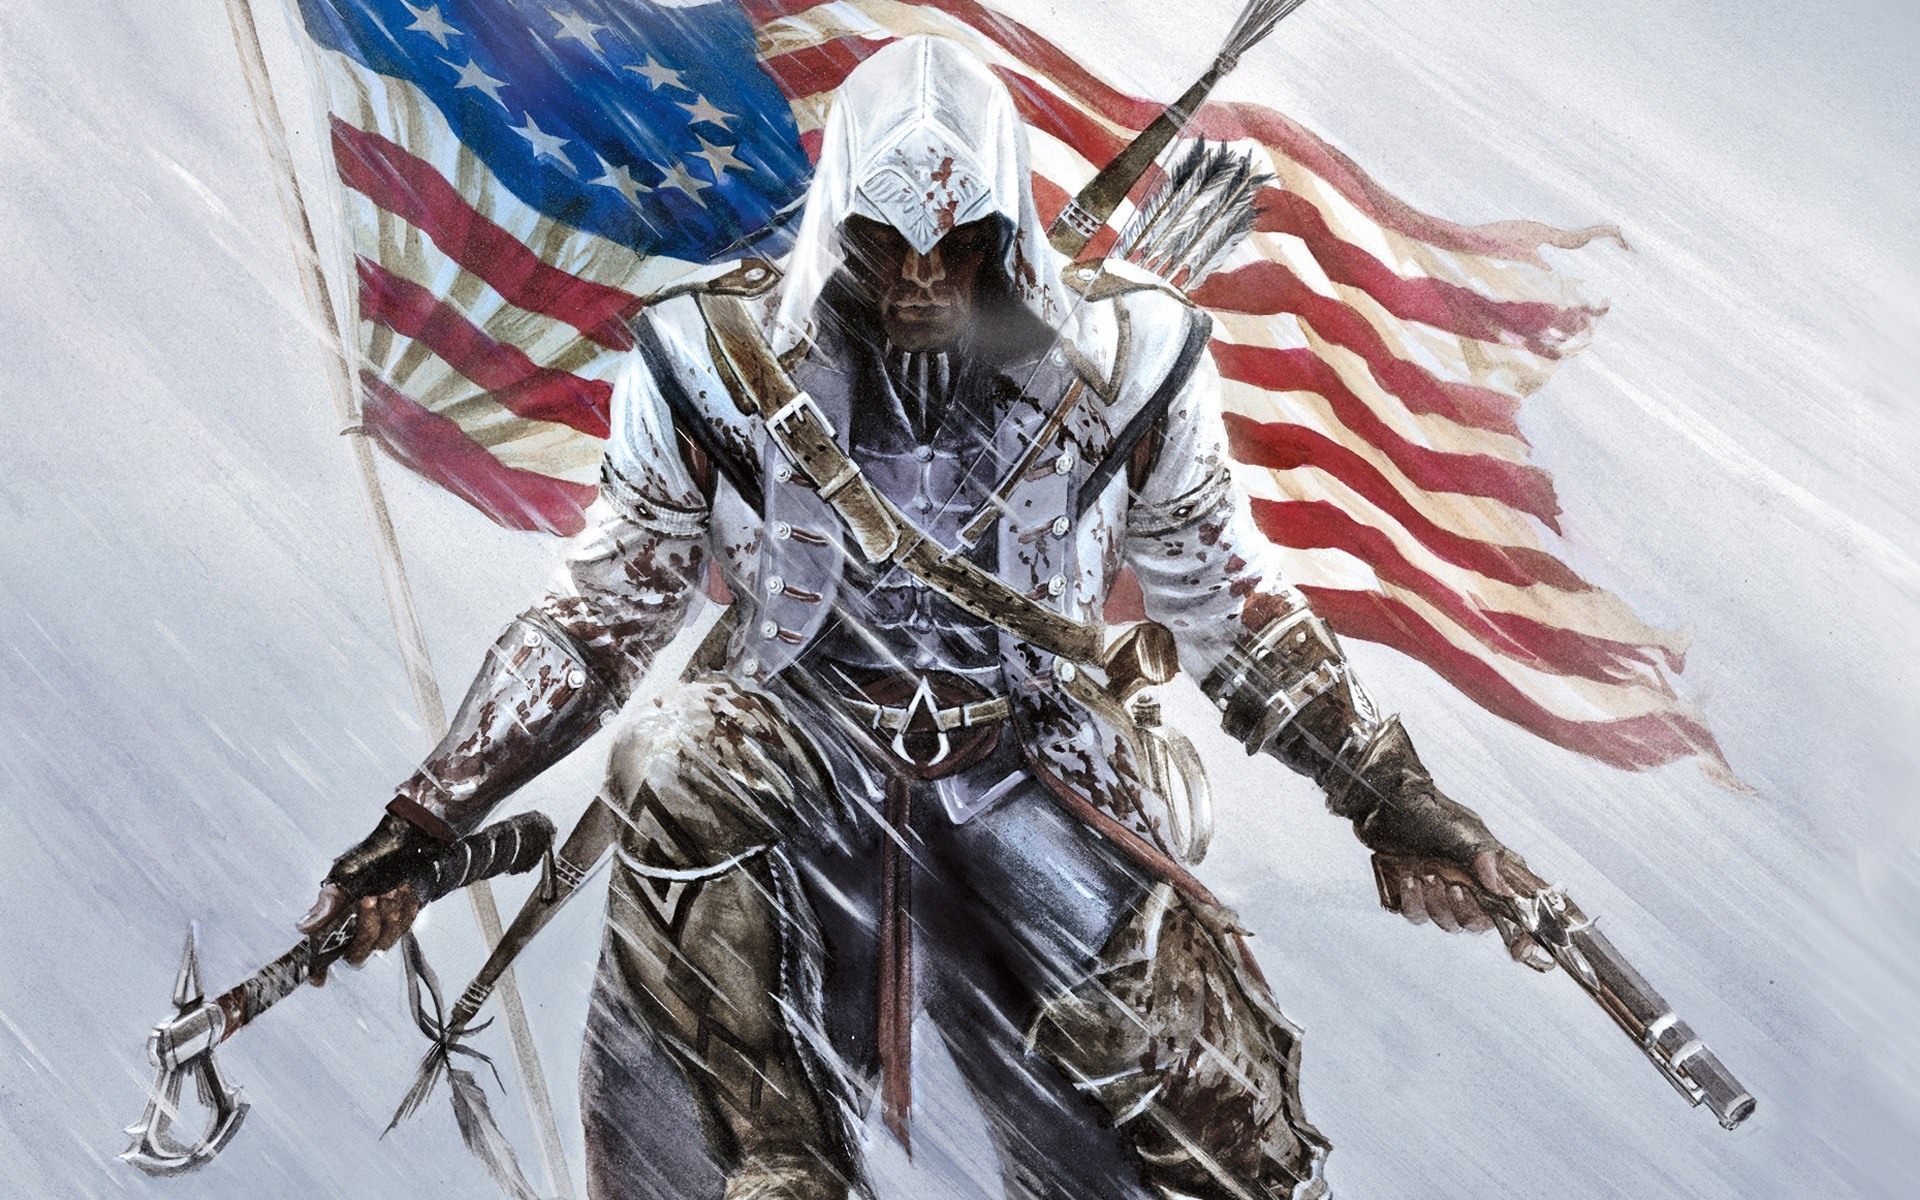 Assassin's Creed 3 HD wallpapers #1 - 1920x1200